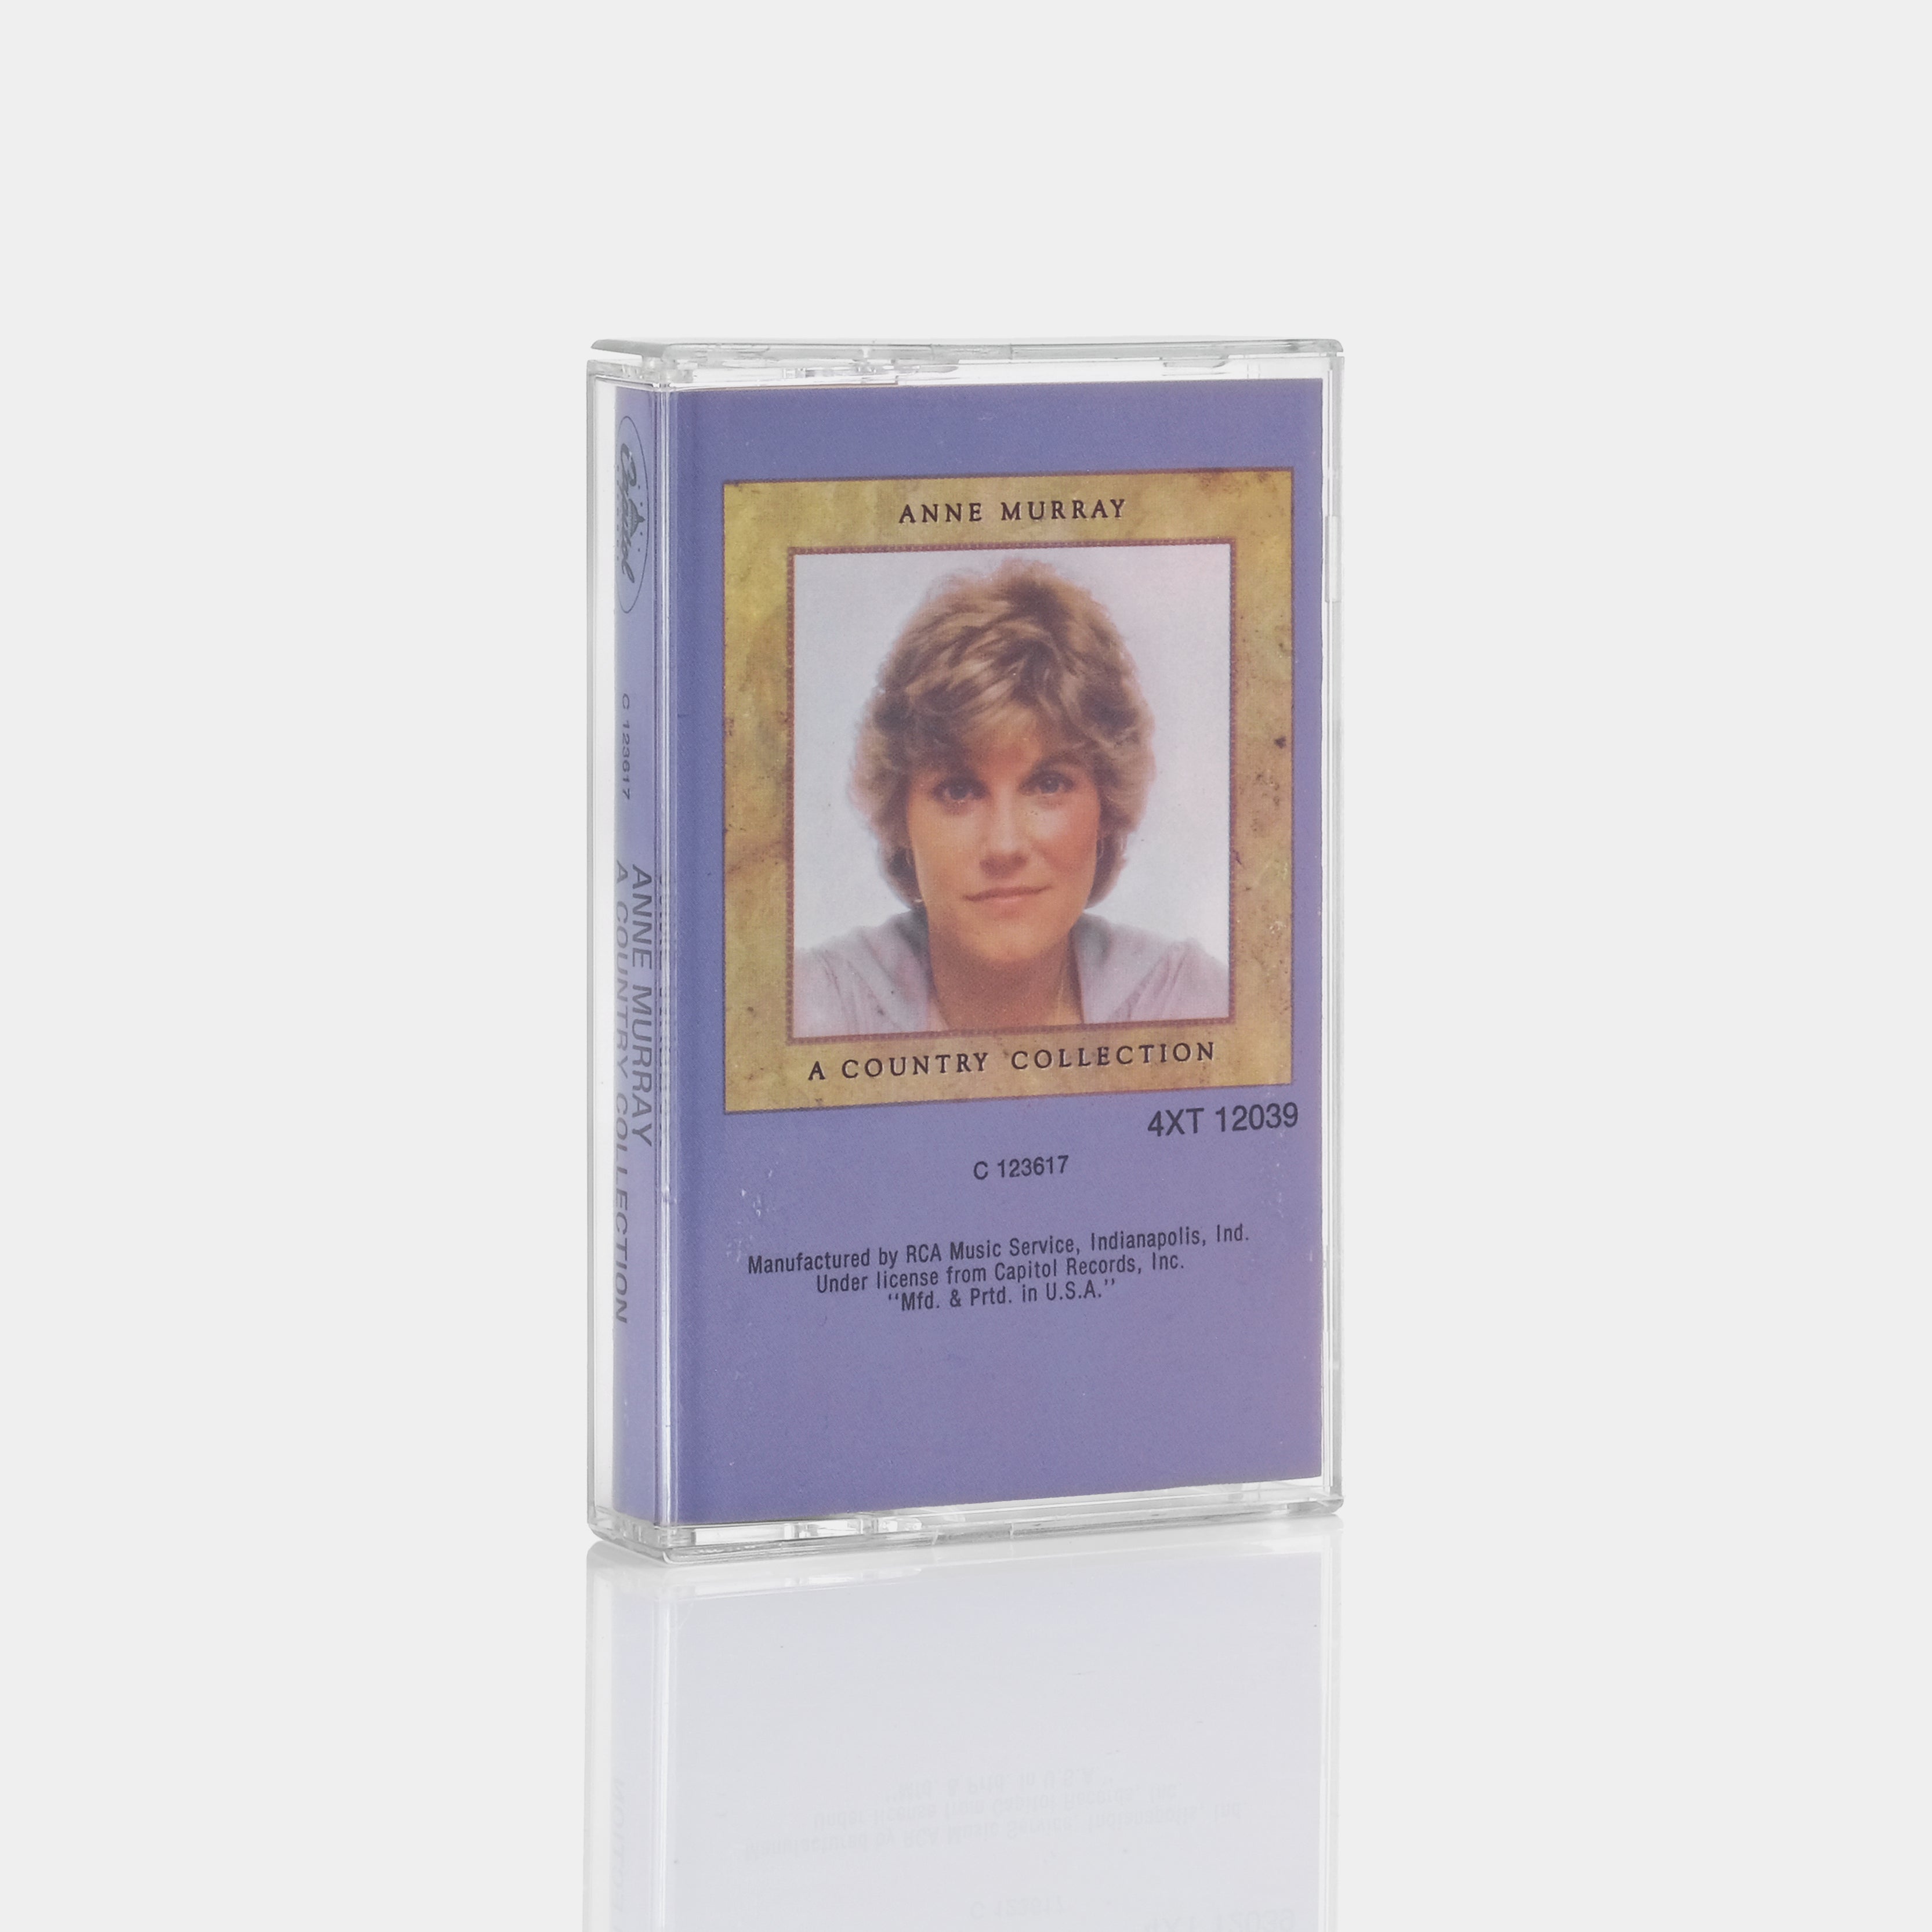 Anne Murray - A Country Collection Cassette Tape